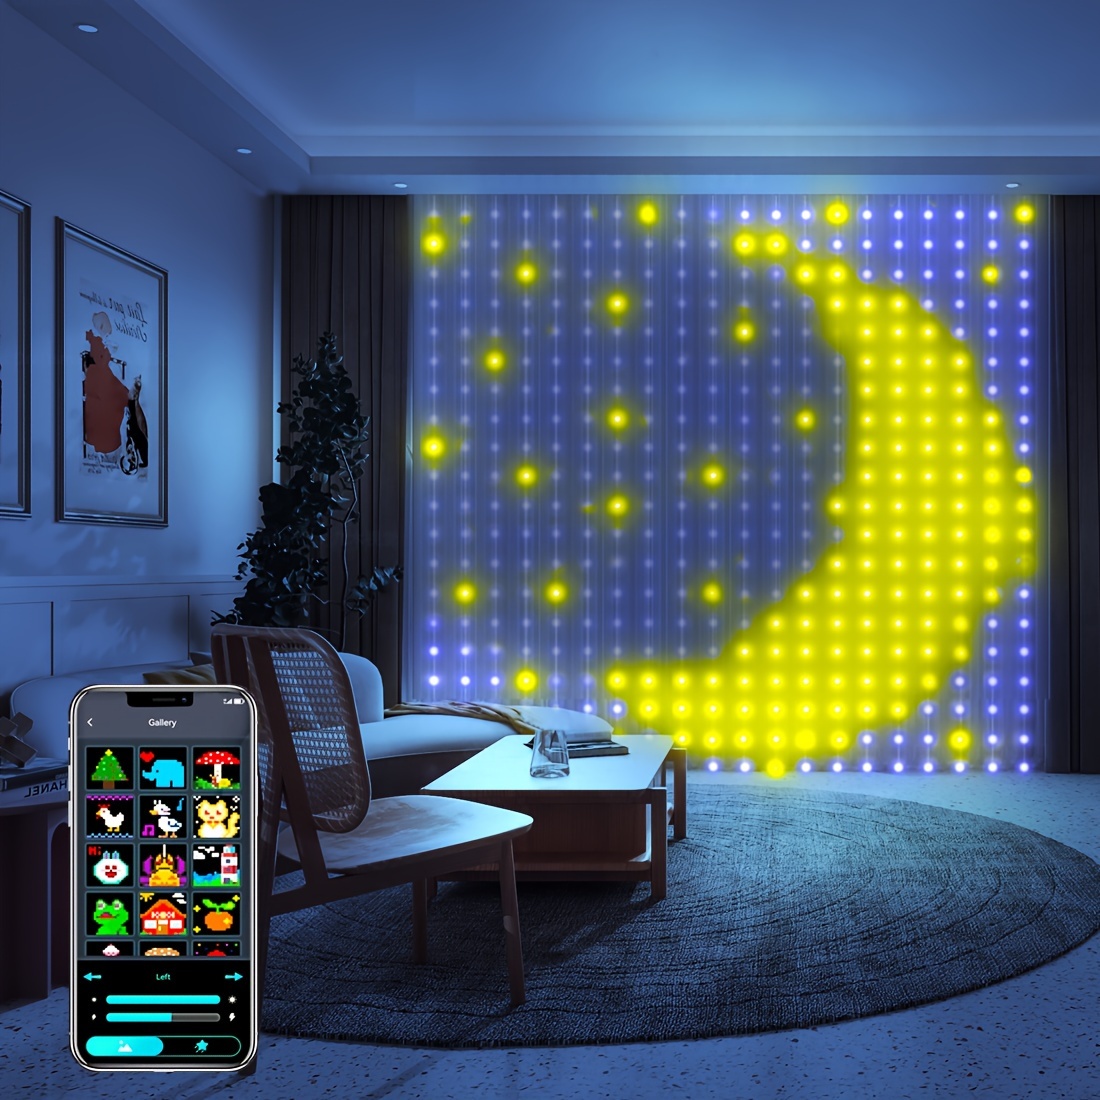 

Smart Curtain Lights, 400 Led Rgb Lights Outdoor App Controlled With Color Changing, Dynamic Diy, Music &voice Sync For Camping, Backyard, Garden, Christmas, Shop